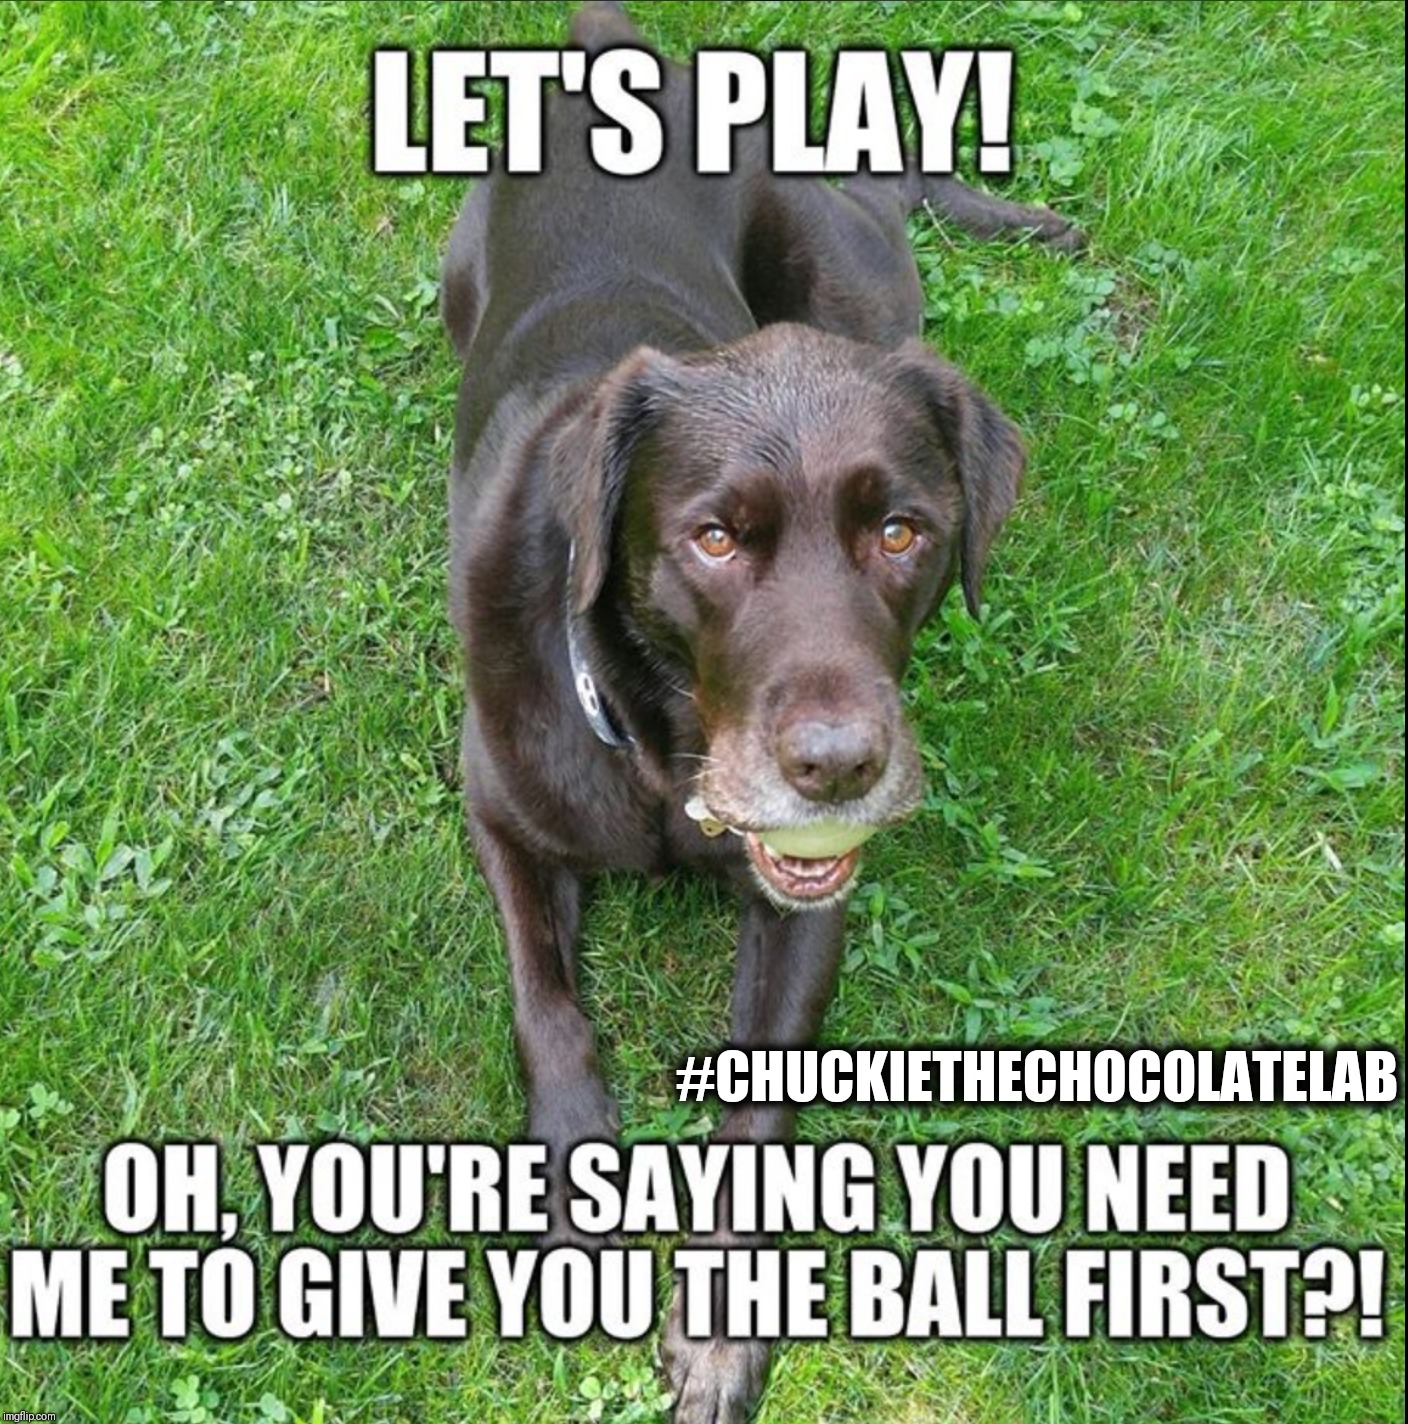 Play ball! | #CHUCKIETHECHOCOLATELAB | image tagged in chuckie the chocolate lab,ball,funny,dogs,memes | made w/ Imgflip meme maker